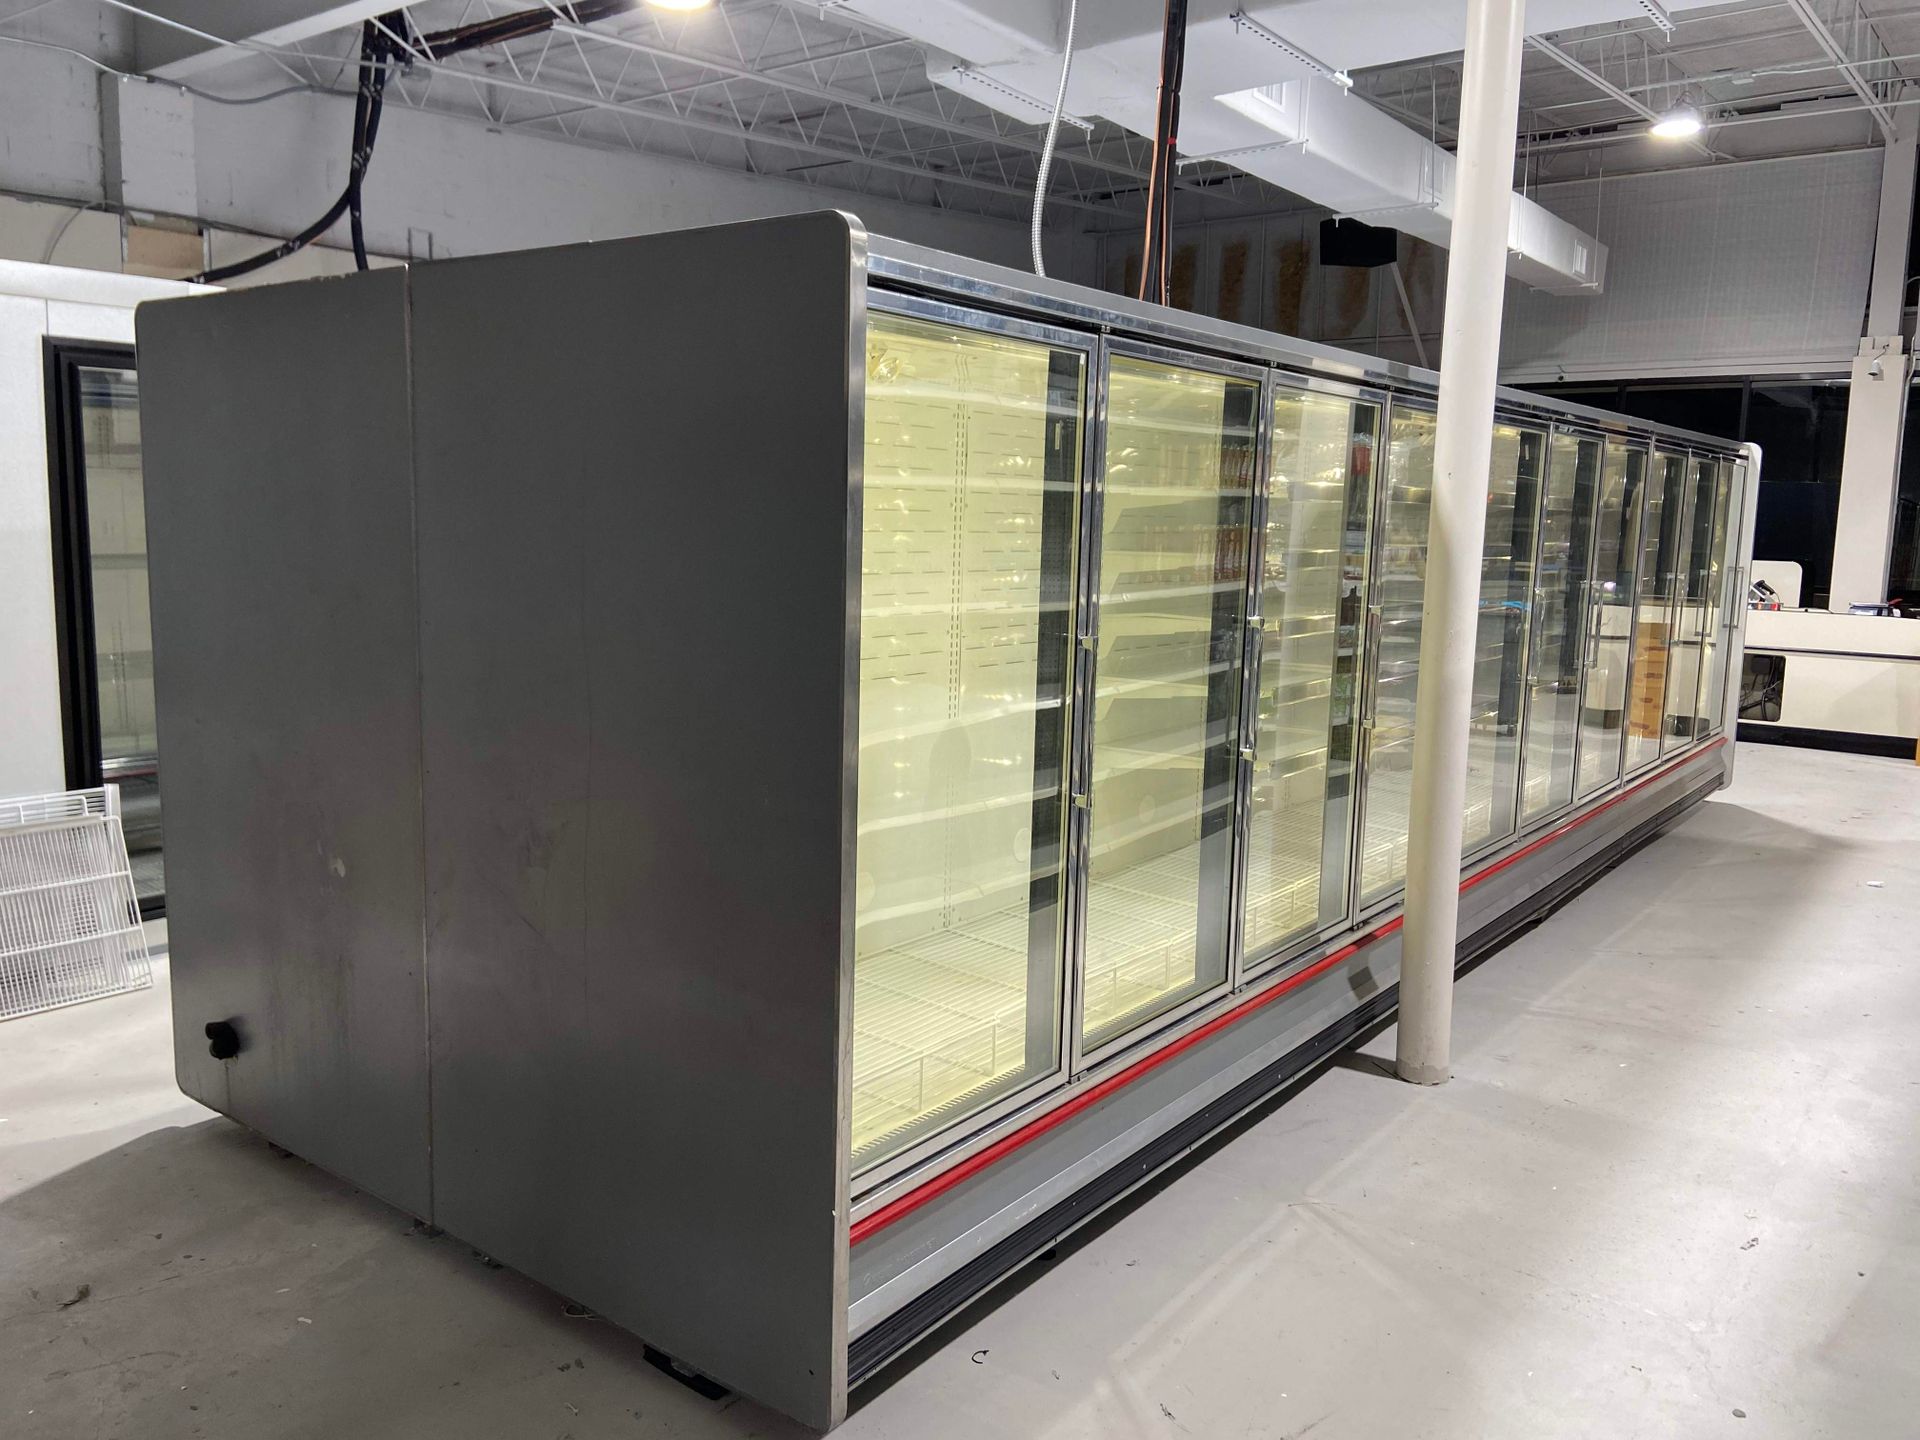 Commercial Refrigeration Units Sale and Service in Ocala, FL